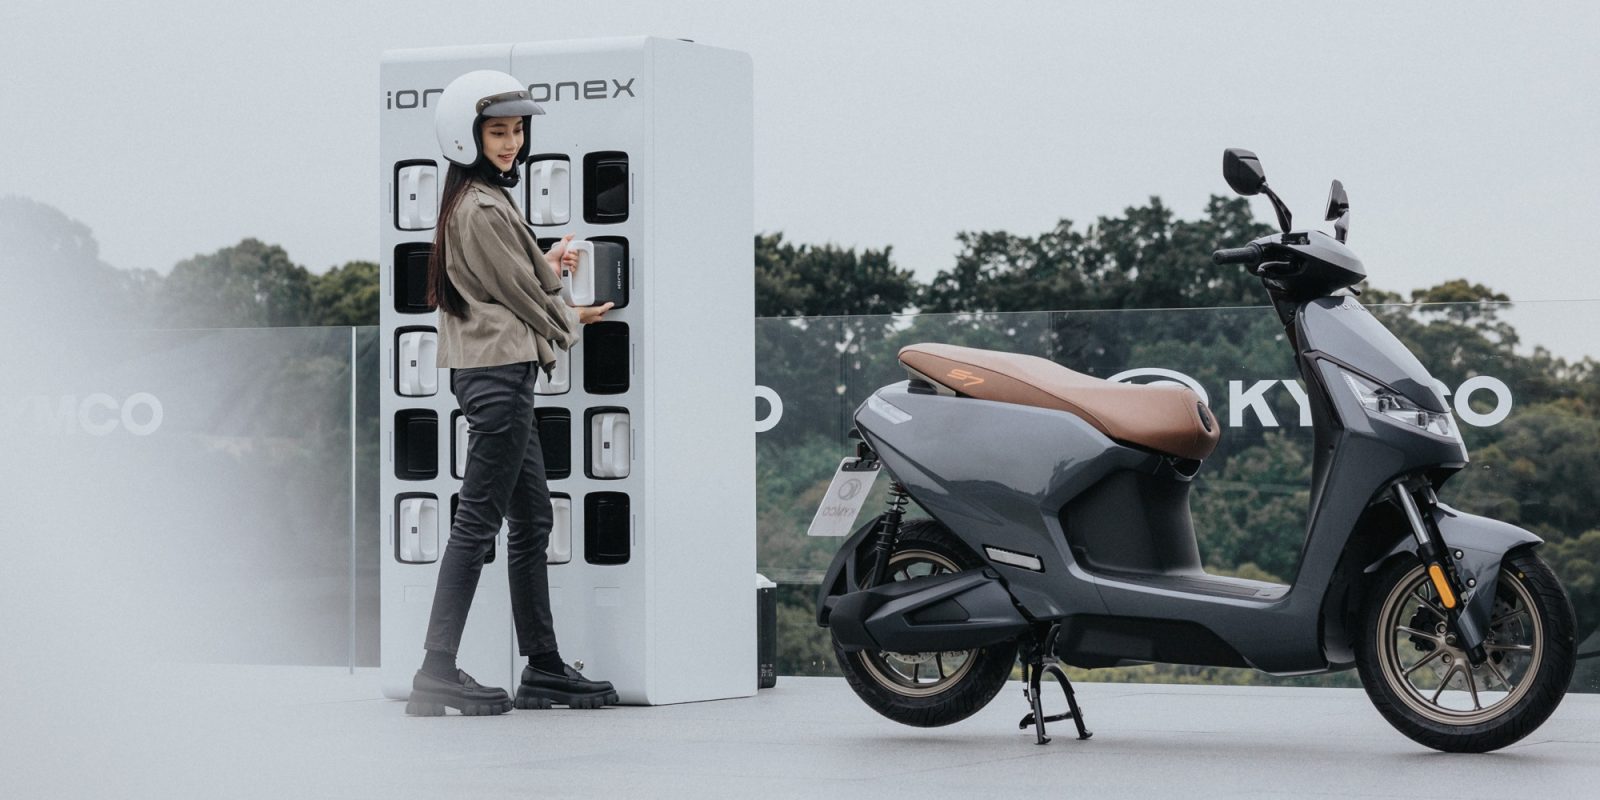 swapping electric scooters coming to Europe via KYMCO's Ionex